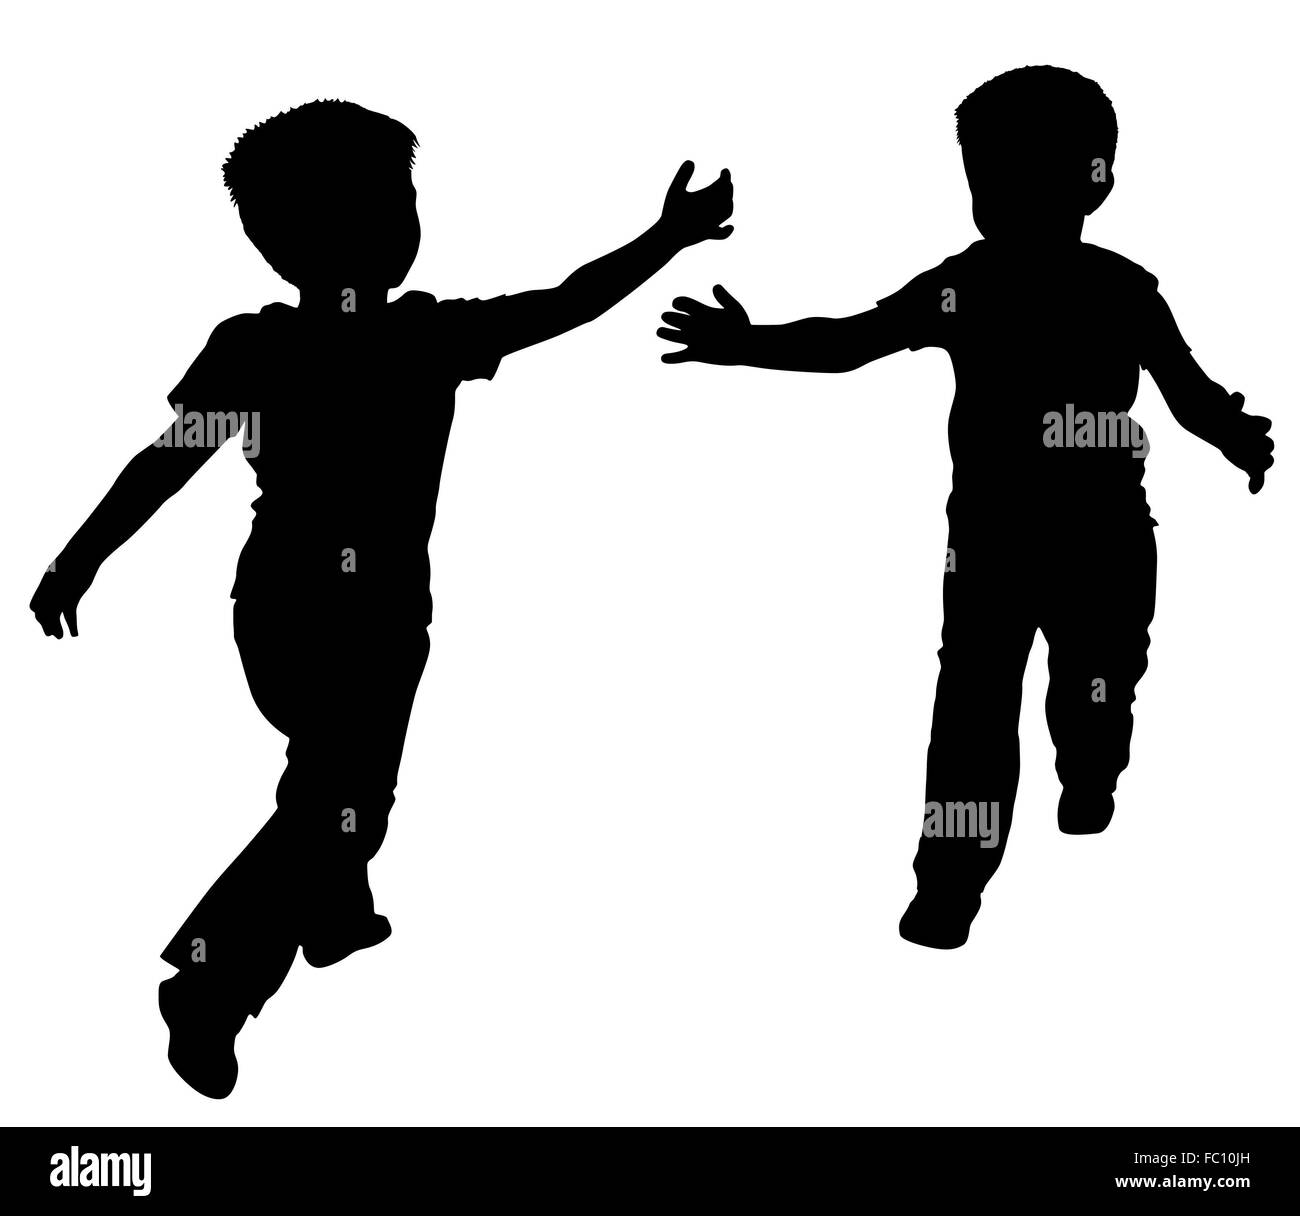 Silhouettes of two little boys Stock Photo